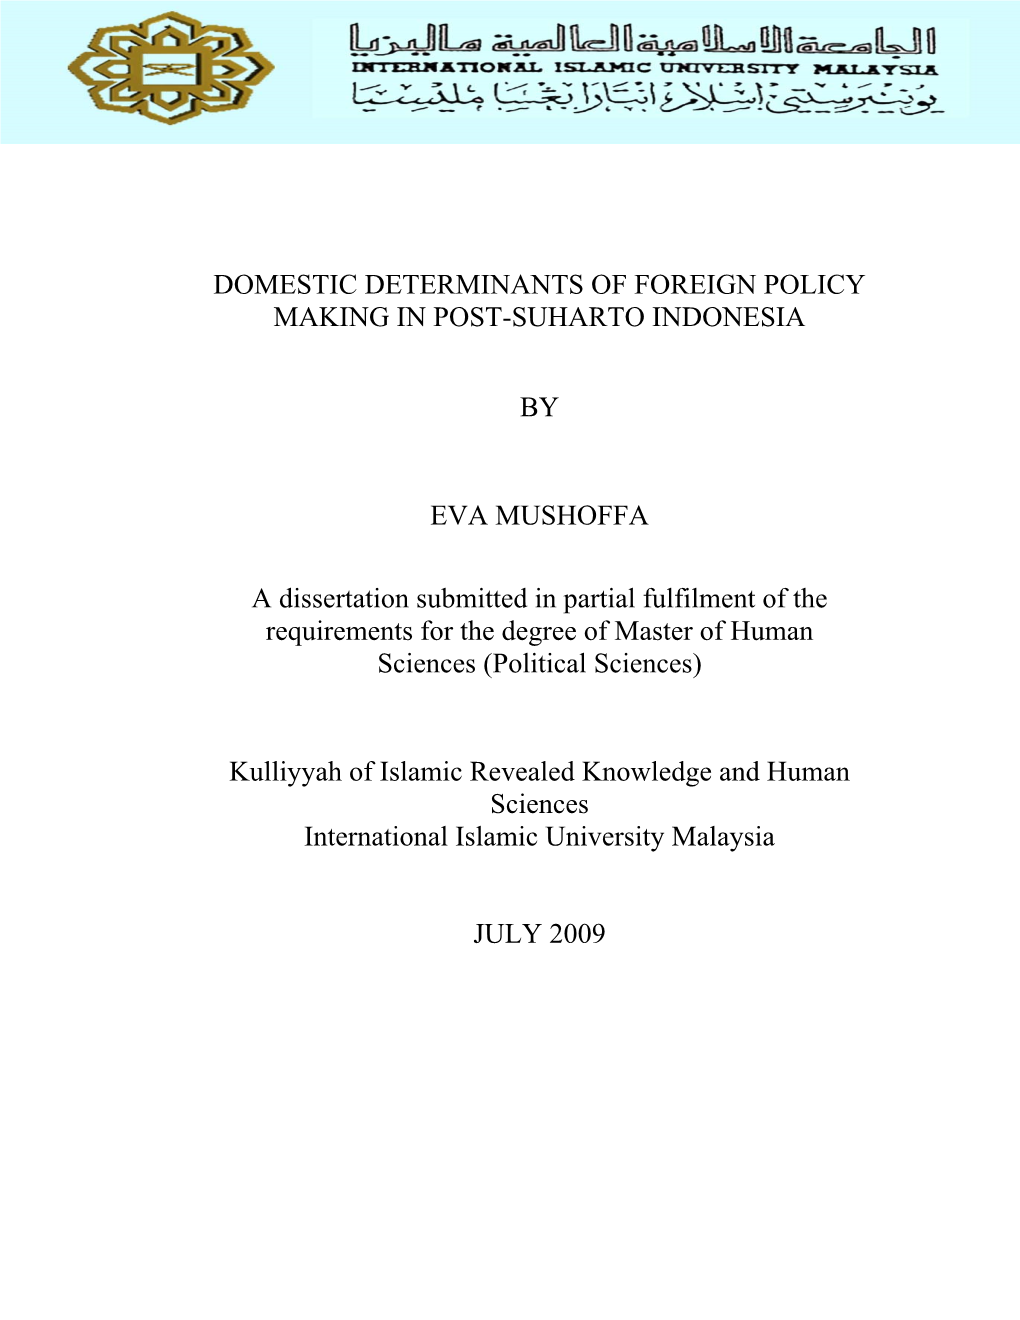 Domestic Determinants of Foreign Policy Making in Post-Suharto Indonesia